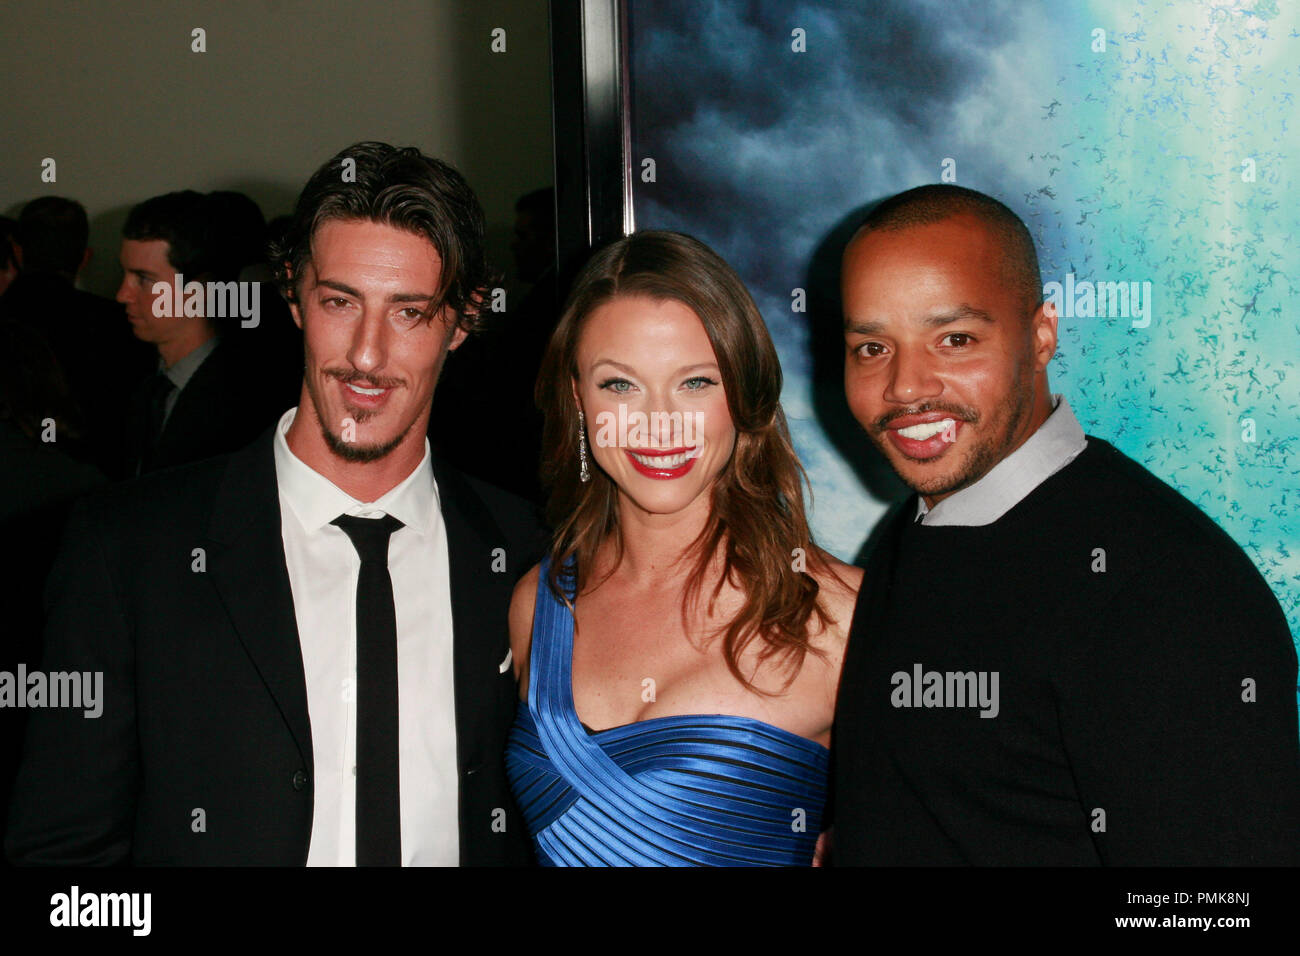 Eric Balfour, Scottie Thompson and Donald Faison at the World Premiere of Rogue's 'Skyline'. Arrivals held at The Regal Cinemas L.A. Live in Los Angeles, CA, November 9, 2010.  Photo © Joseph Martinez/Picturelux - All Rights Reserved.  File Reference # 30682 058JM   For Editorial Use Only - Stock Photo